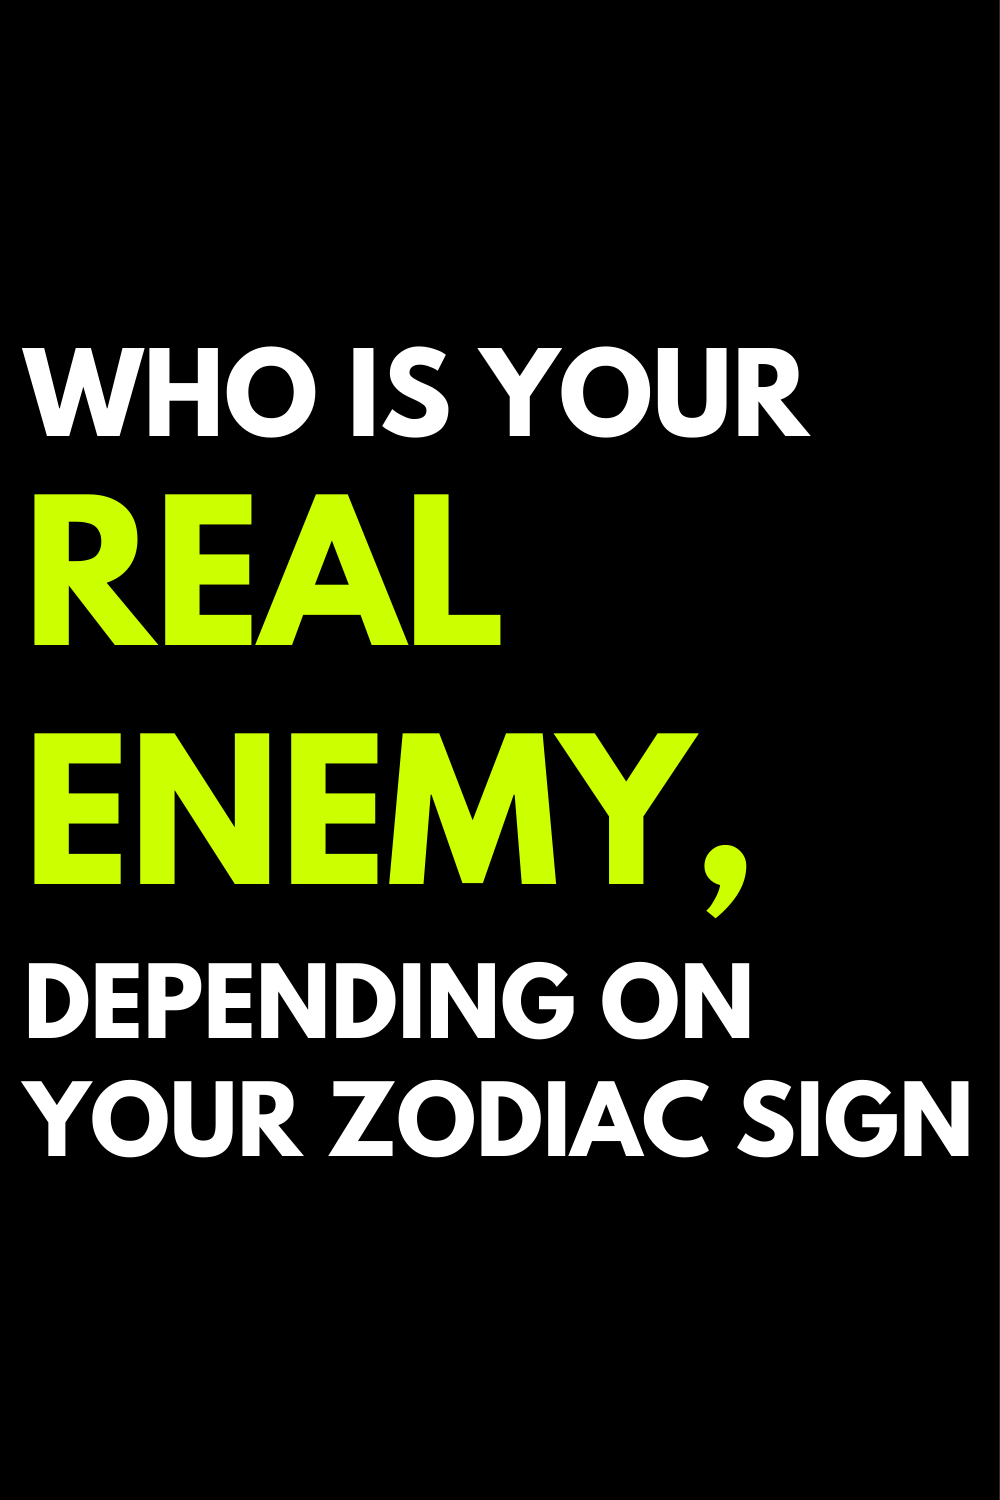 Who is your real enemy, depending on your zodiac sign